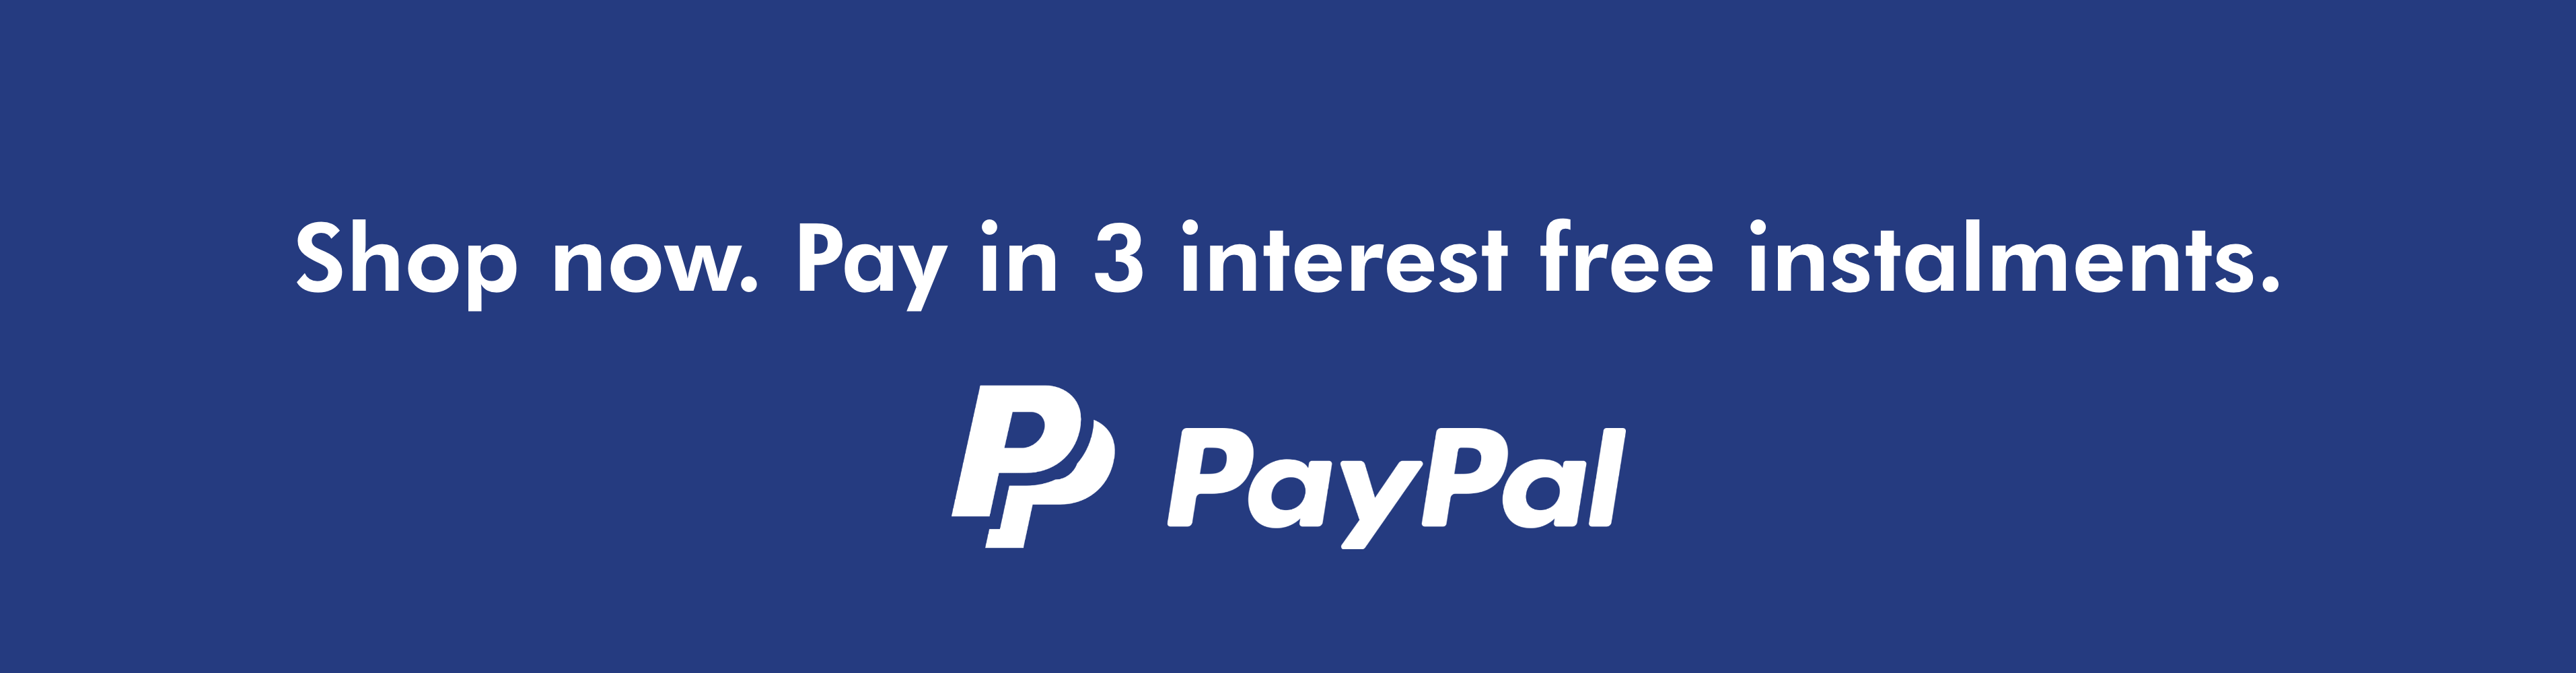 Shop now. Pay in installments with Klarna, Clearpay and Paypal